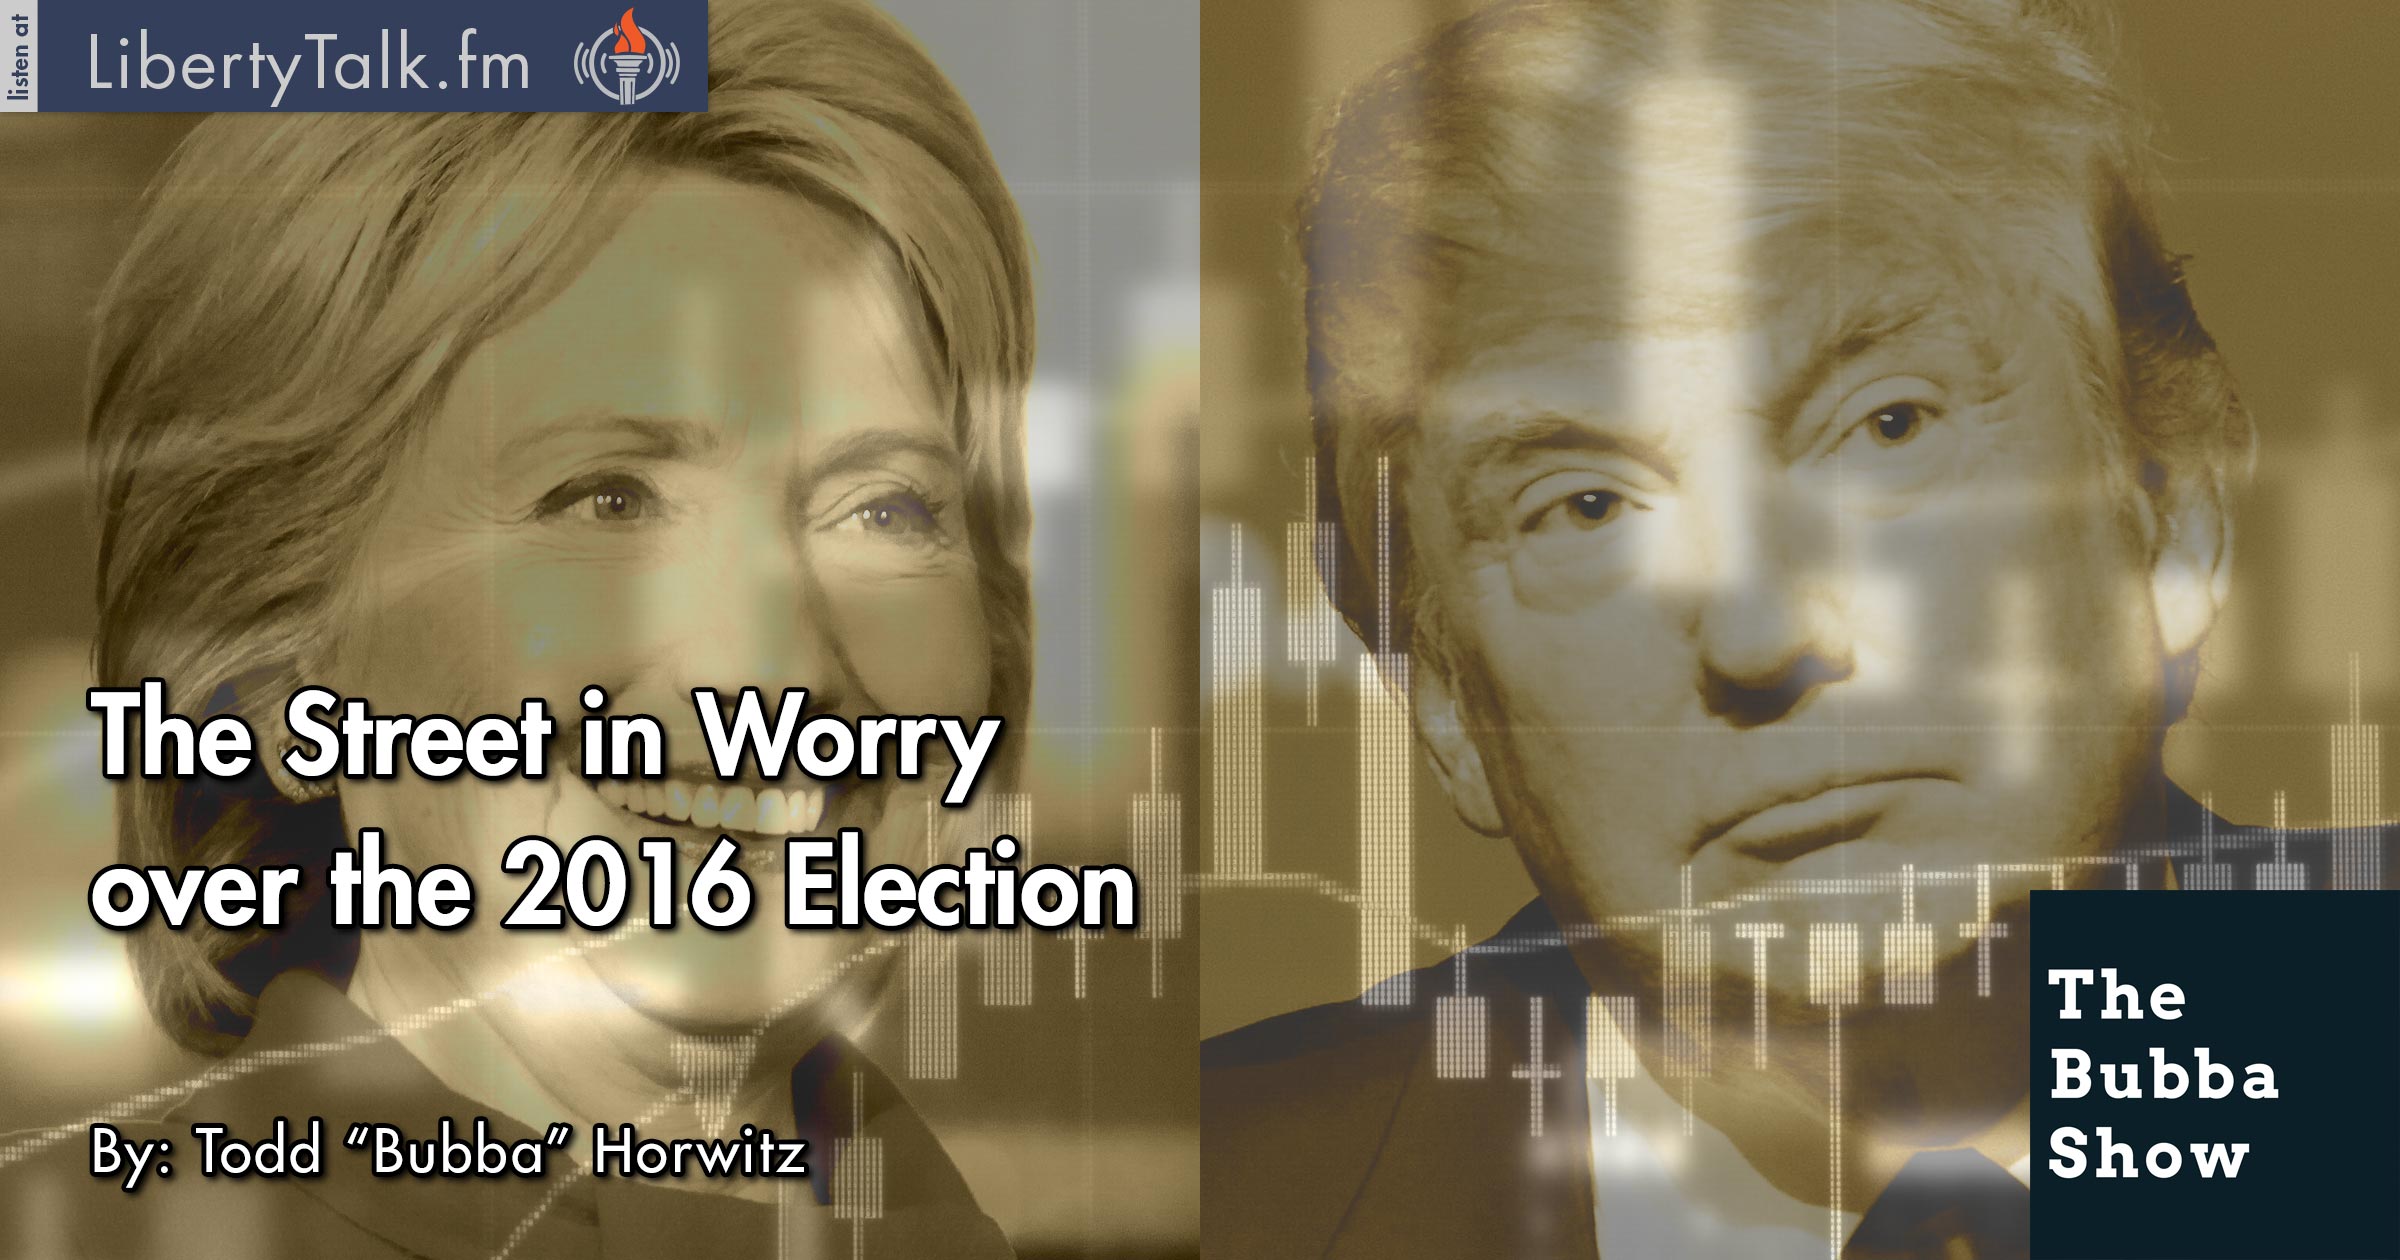 The Street in Worry over the 2016 Election - The Bubba Show